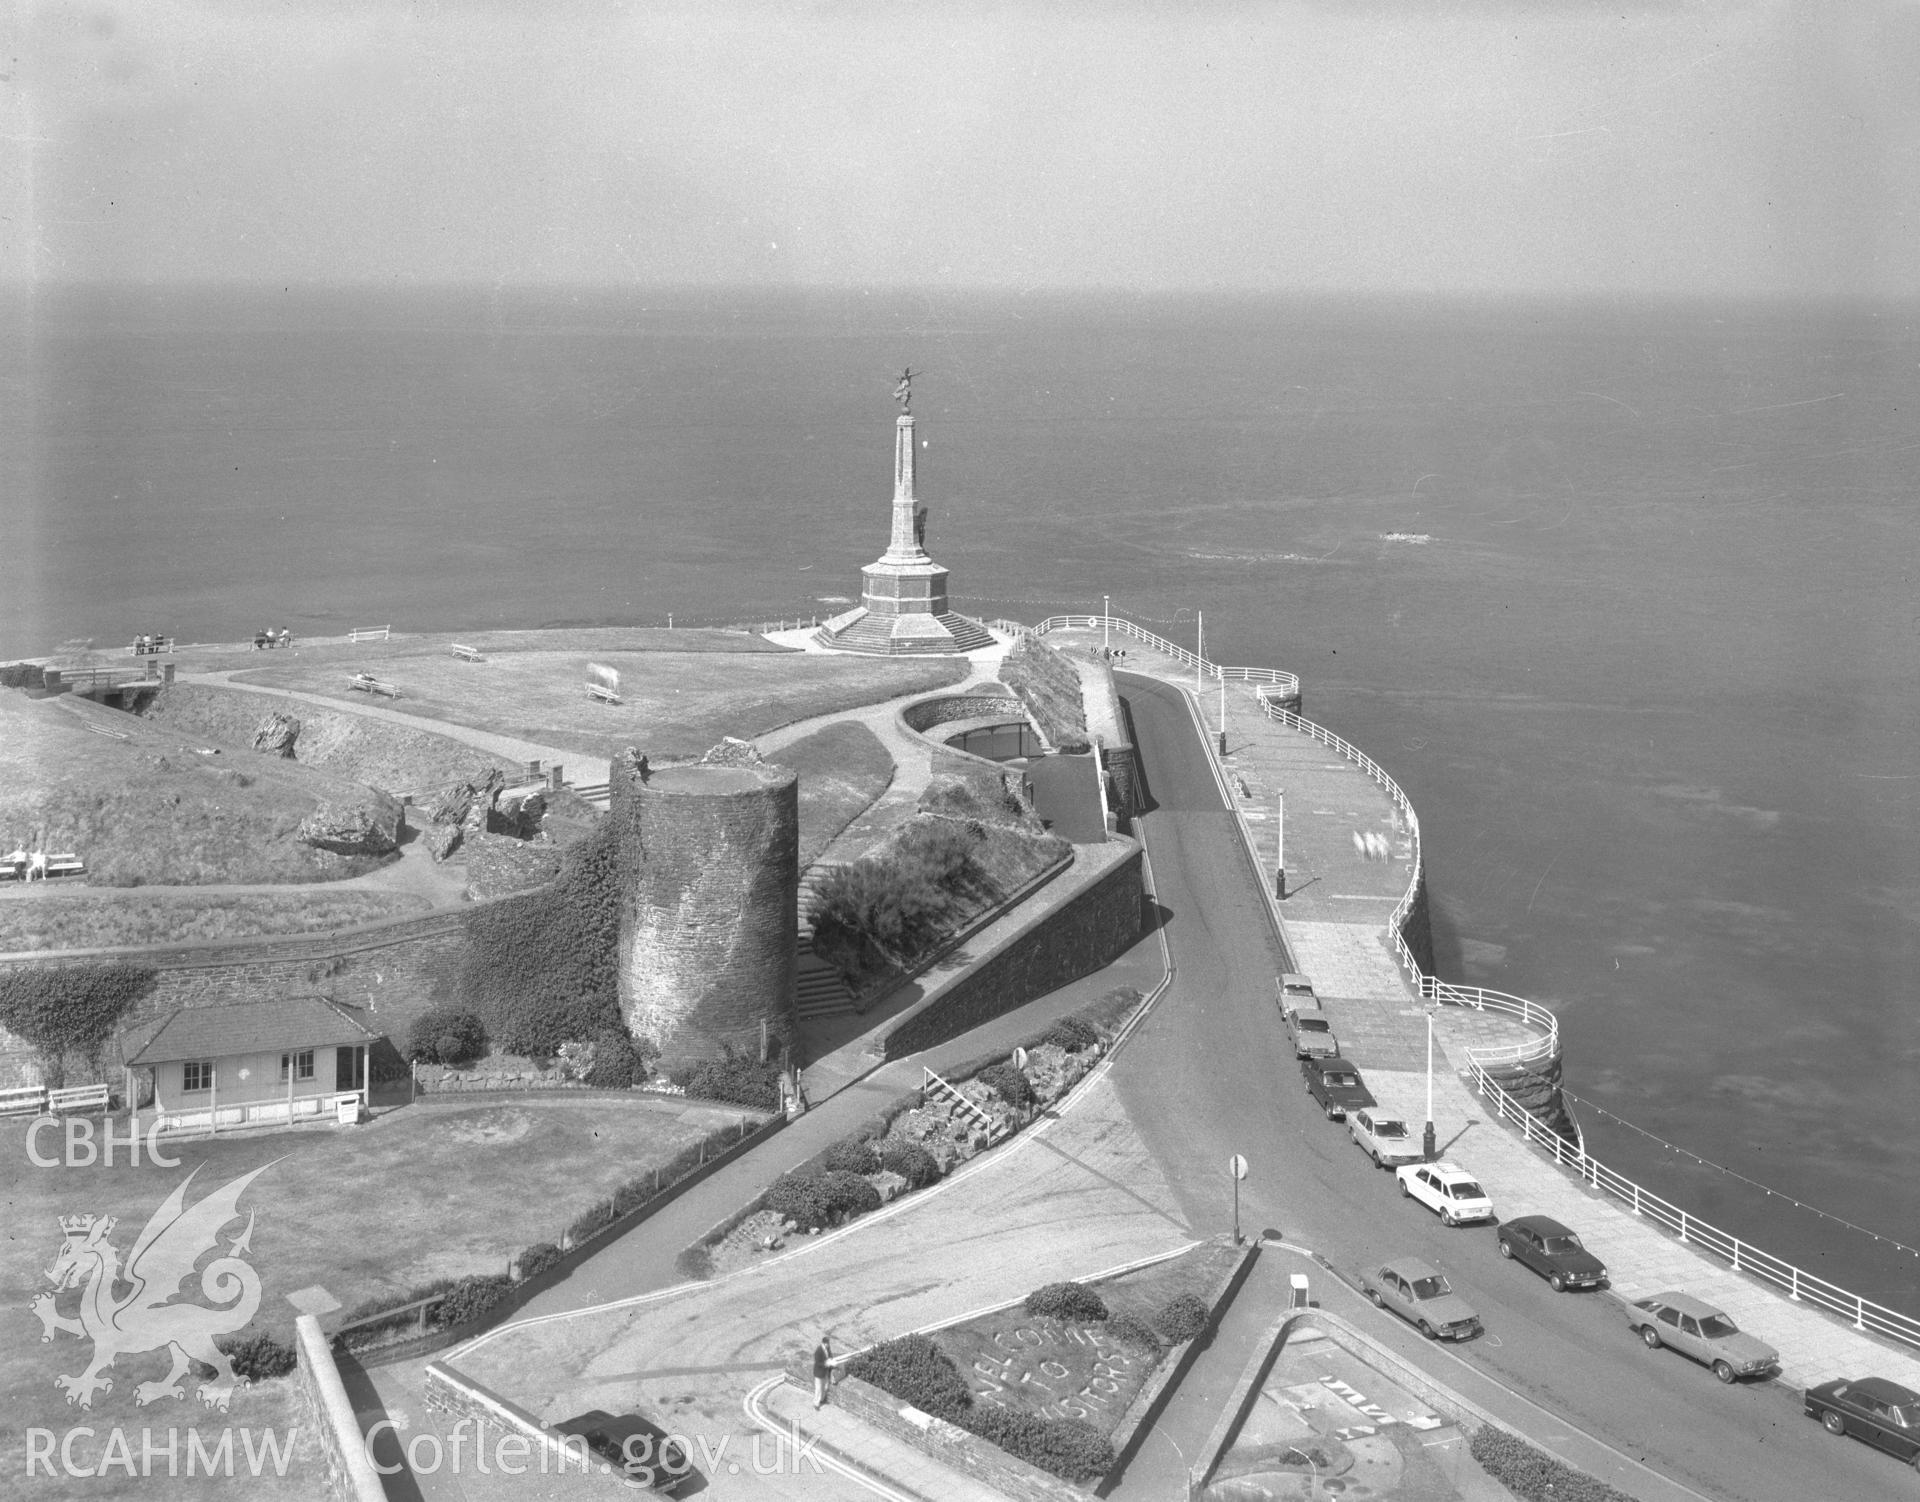 Black and white acetate negative showing a view of Aberystwyth Castle.